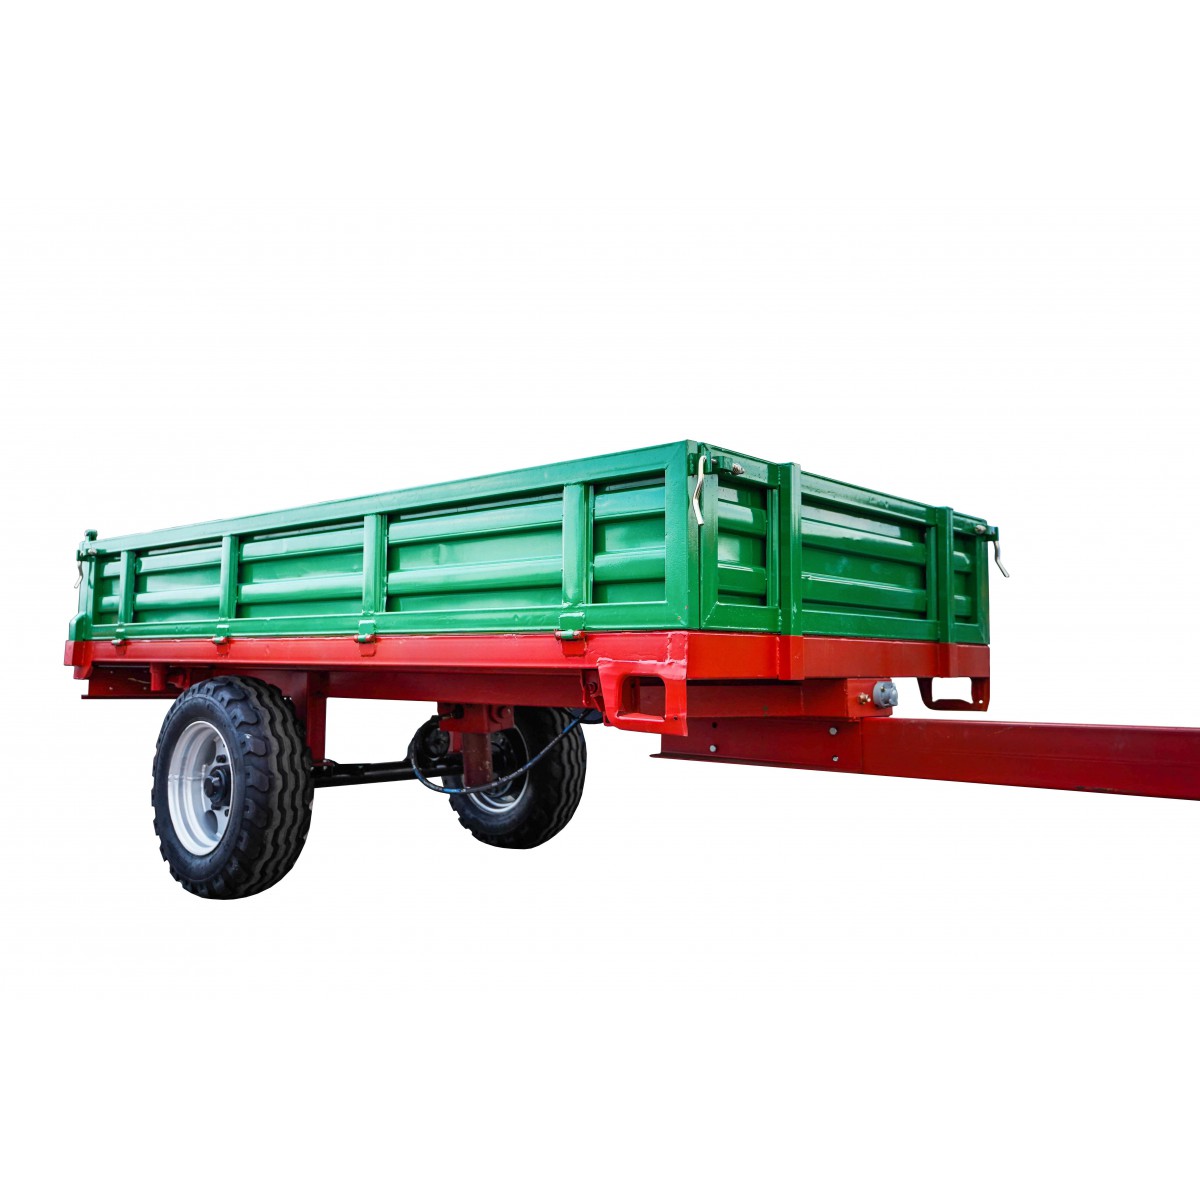 Single-axle agricultural trailer 3T with 4FARMER trailer